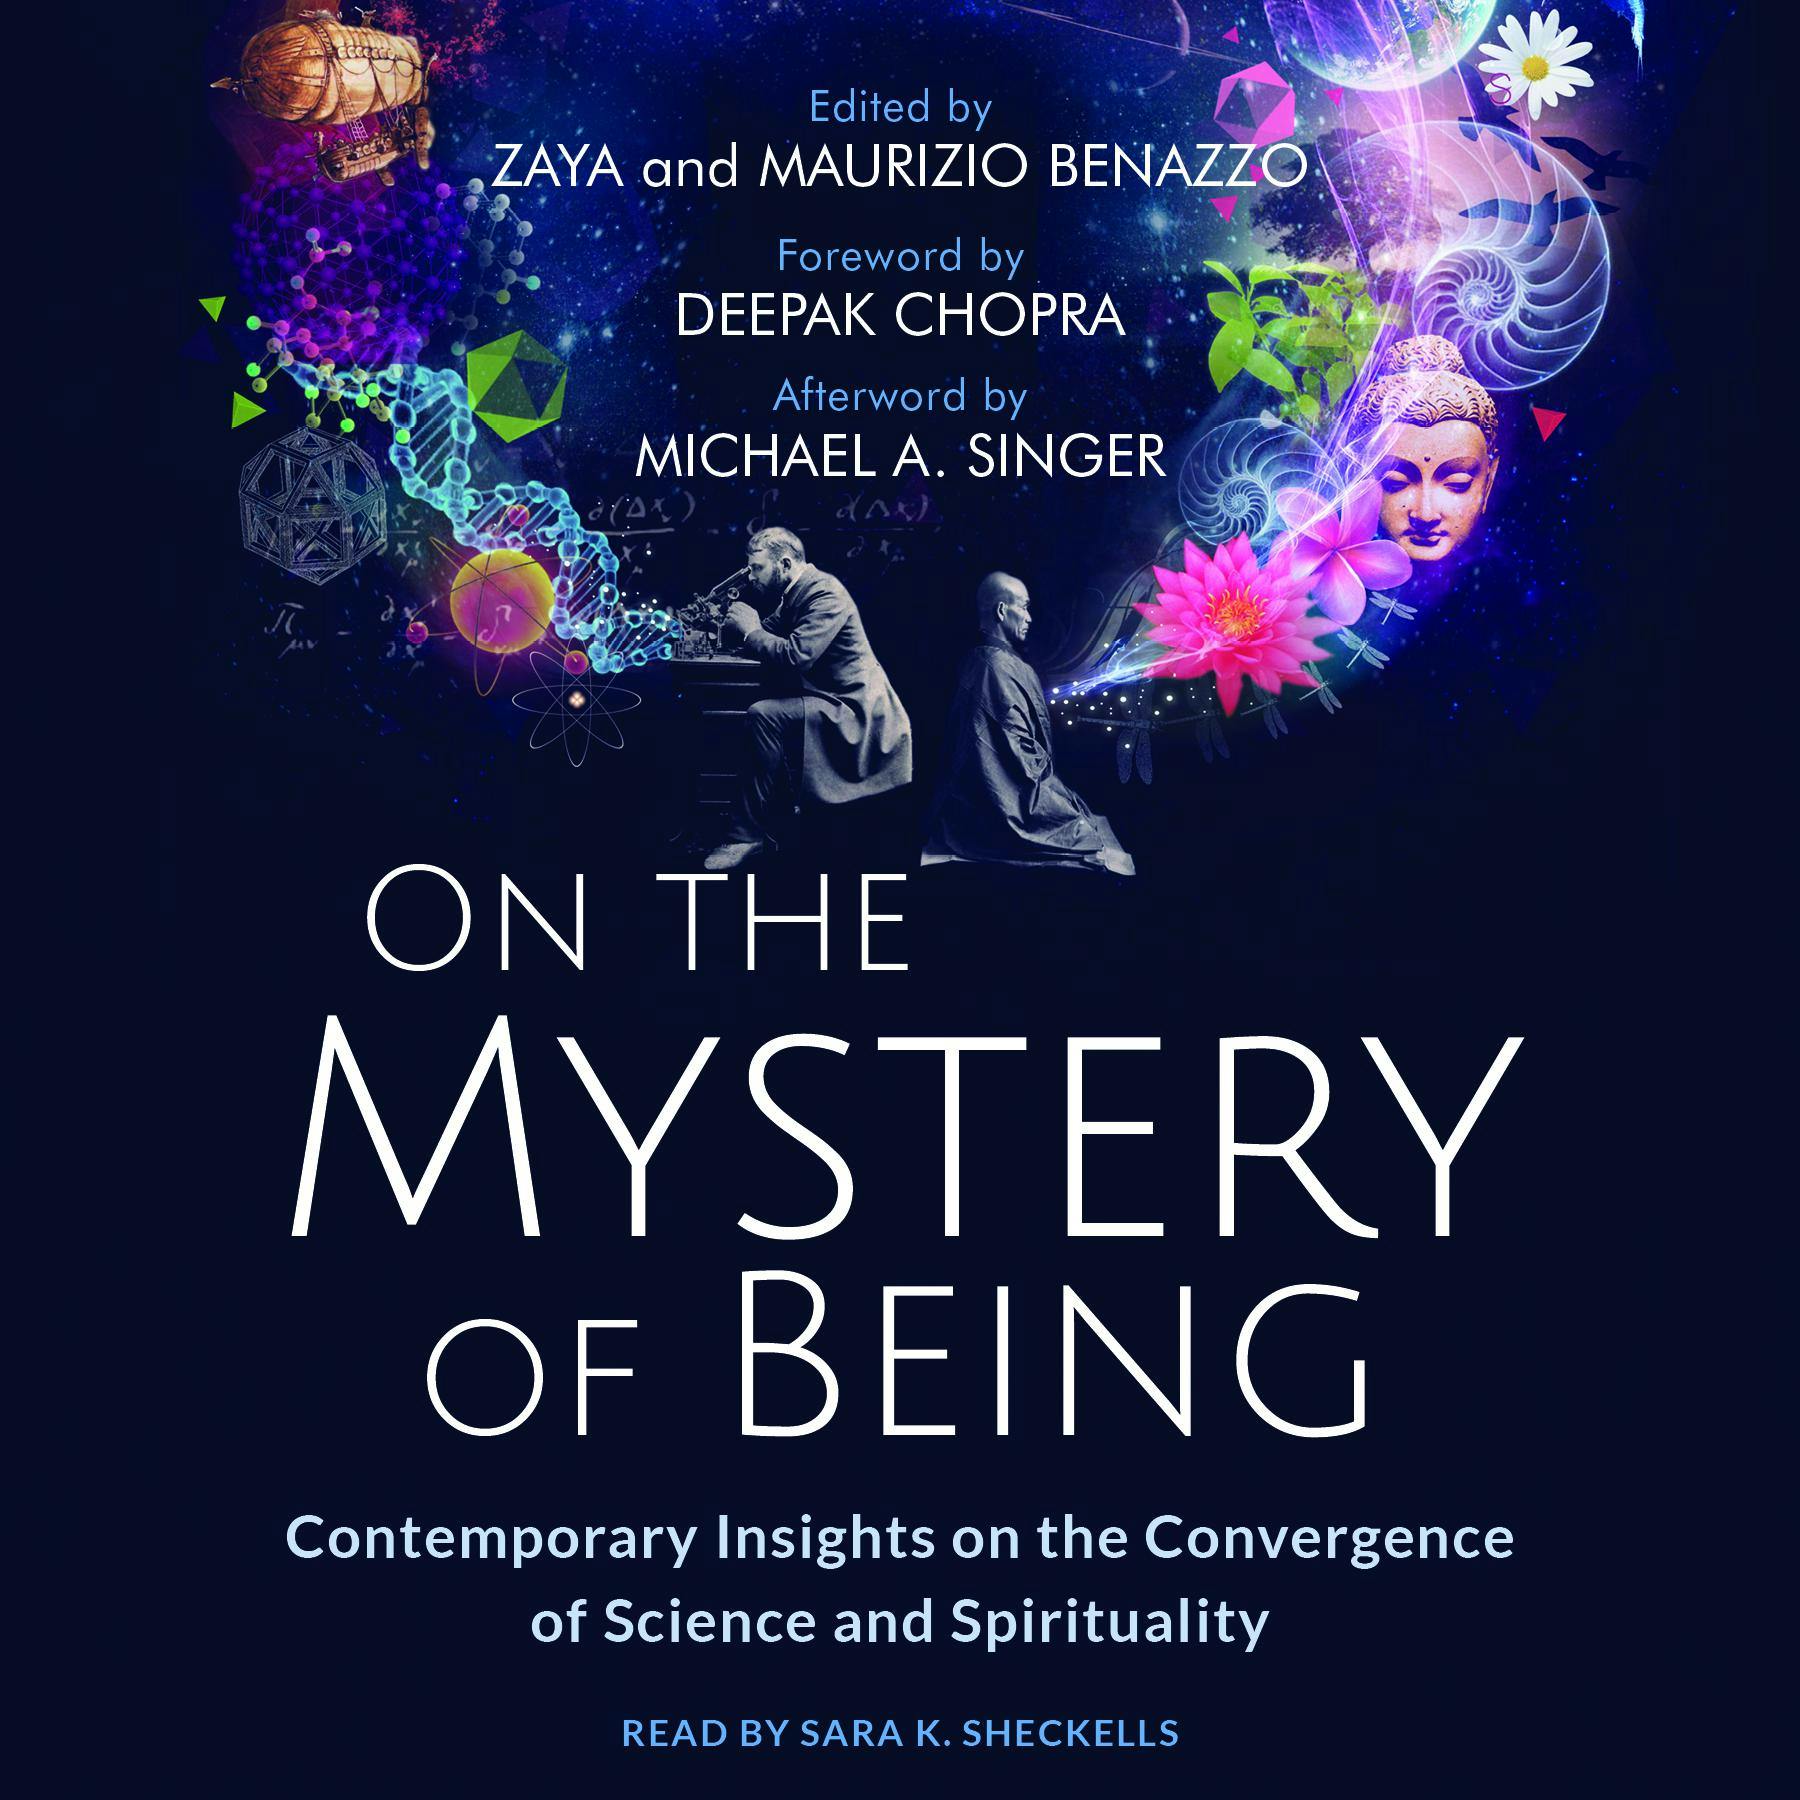 On the Mystery of Being: Contemporary Insights on the Convergence of Science and Spirituality - Maurizio Benazzo, Michael A Singer, Deepak Chopra, Zaya Benazzo